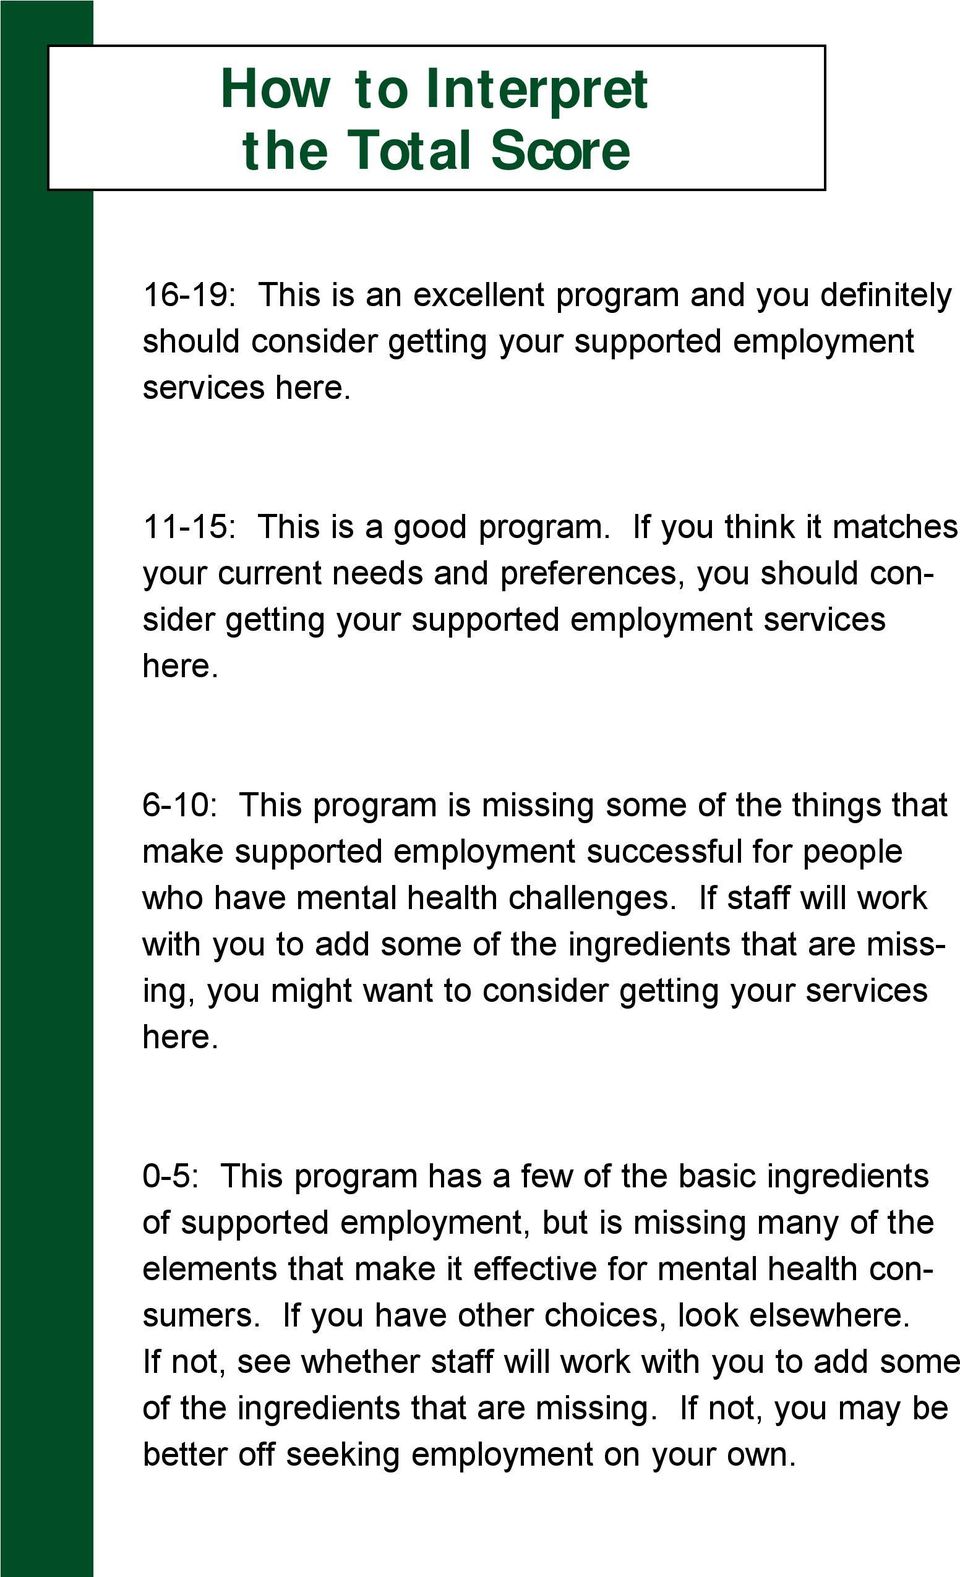 6-10: This program is missing some of the things that make supported employment successful for people who have mental health challenges.